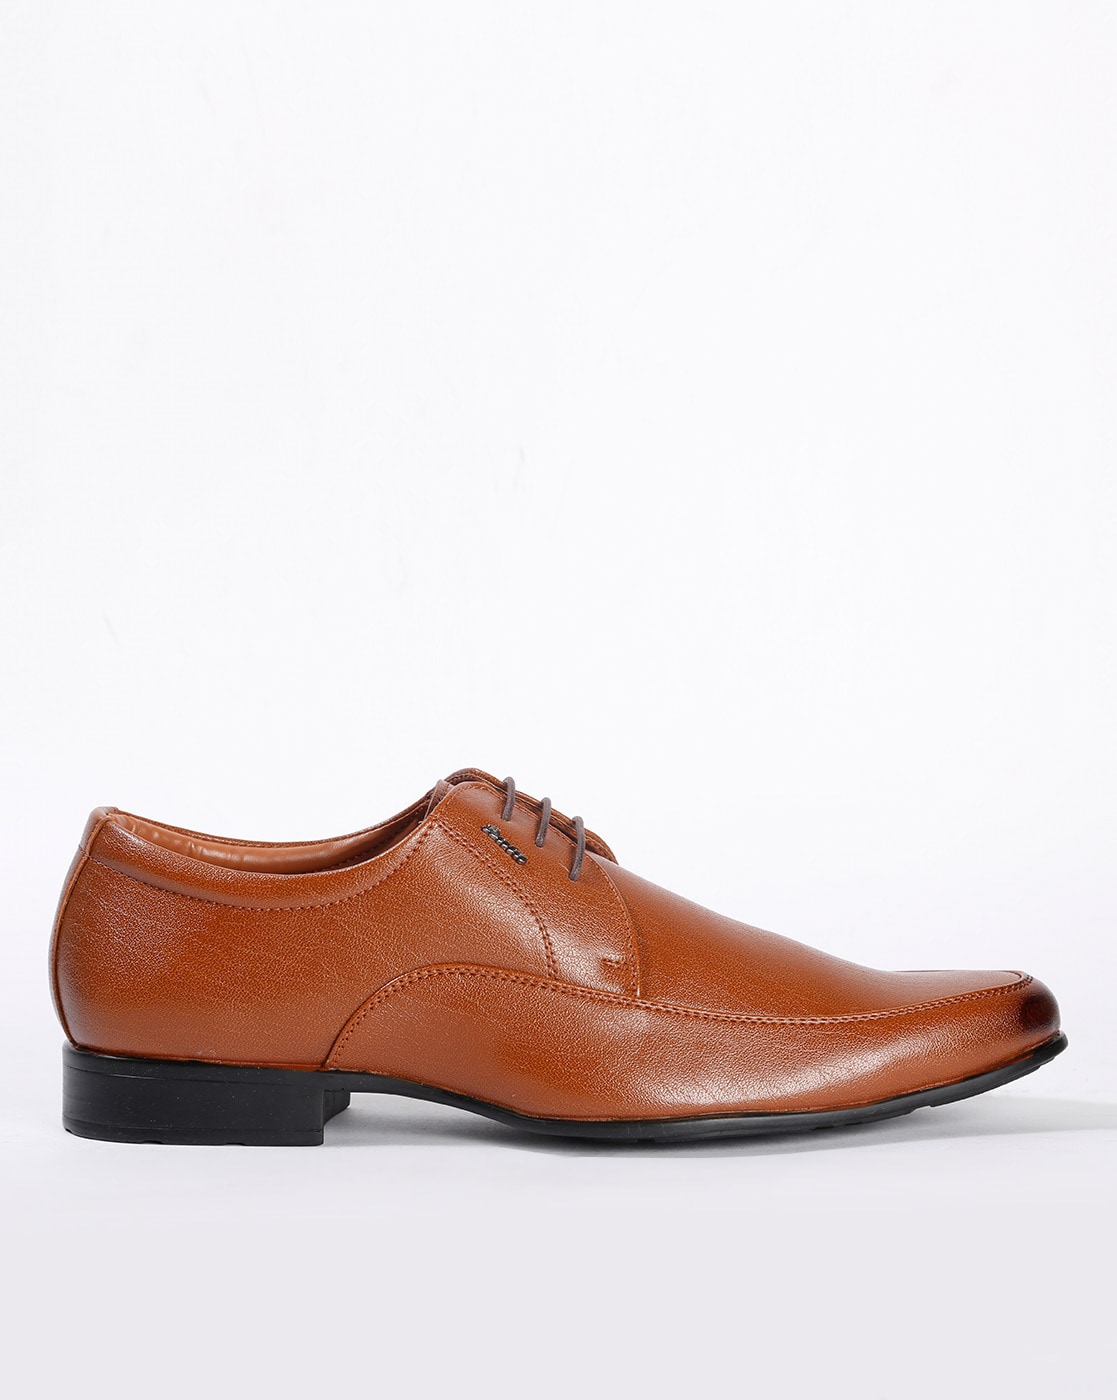 Buy Bata Derby Formal Shoes For Men  TAN  Online at Low Prices in India   Paytmmallcom